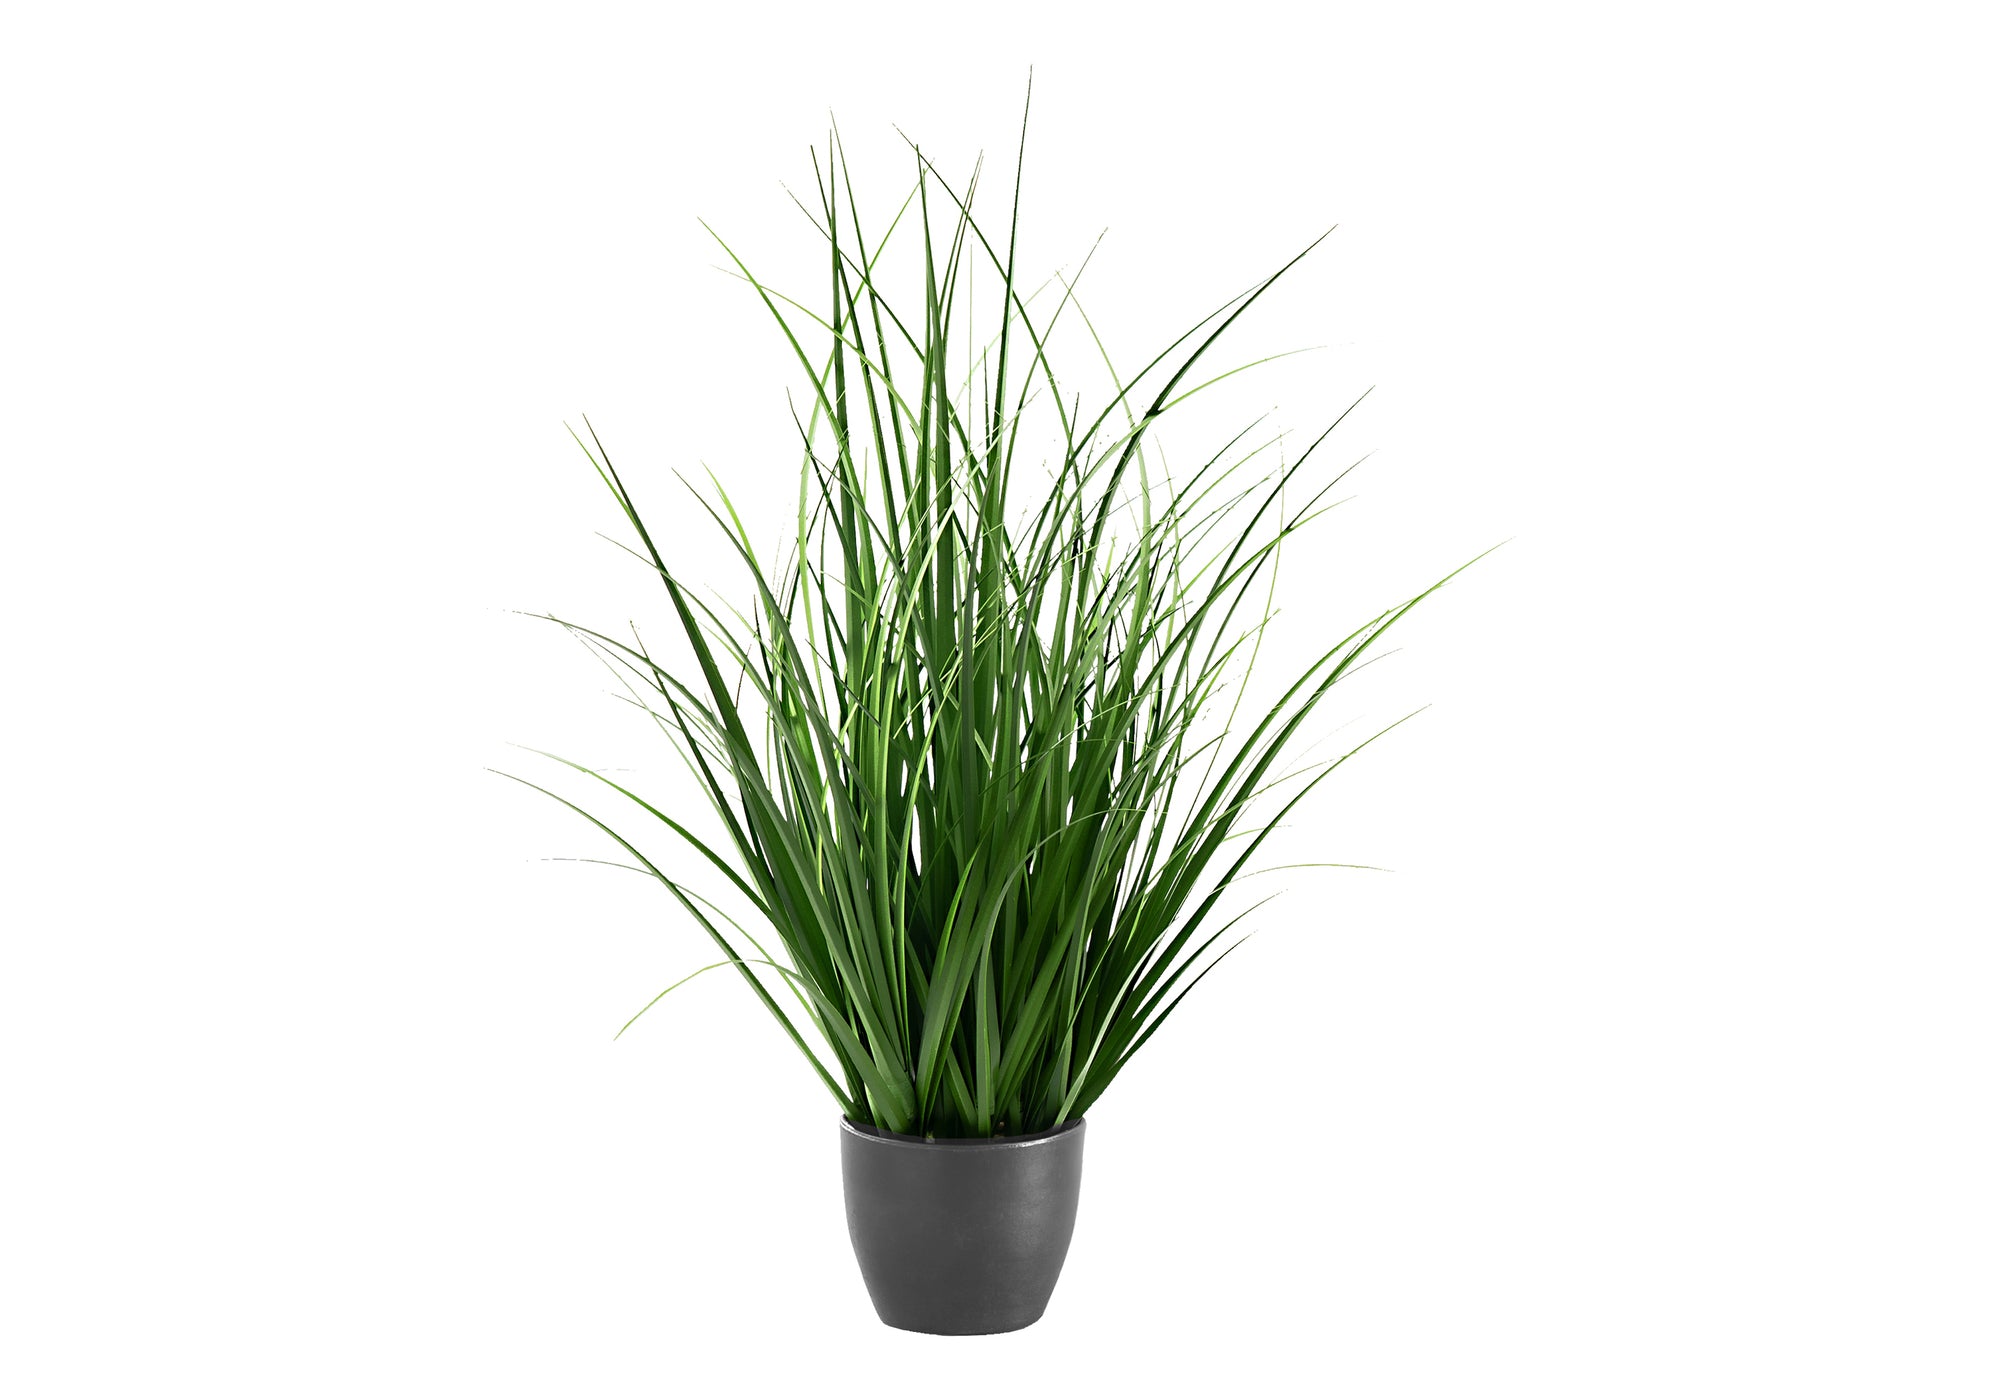 MN-669575    Artificial Plant, 23" Tall, Grass, Indoor, Faux, Fake, Table, Greenery, Potted, Real Touch, Decorative, Green Grass, Black Pot